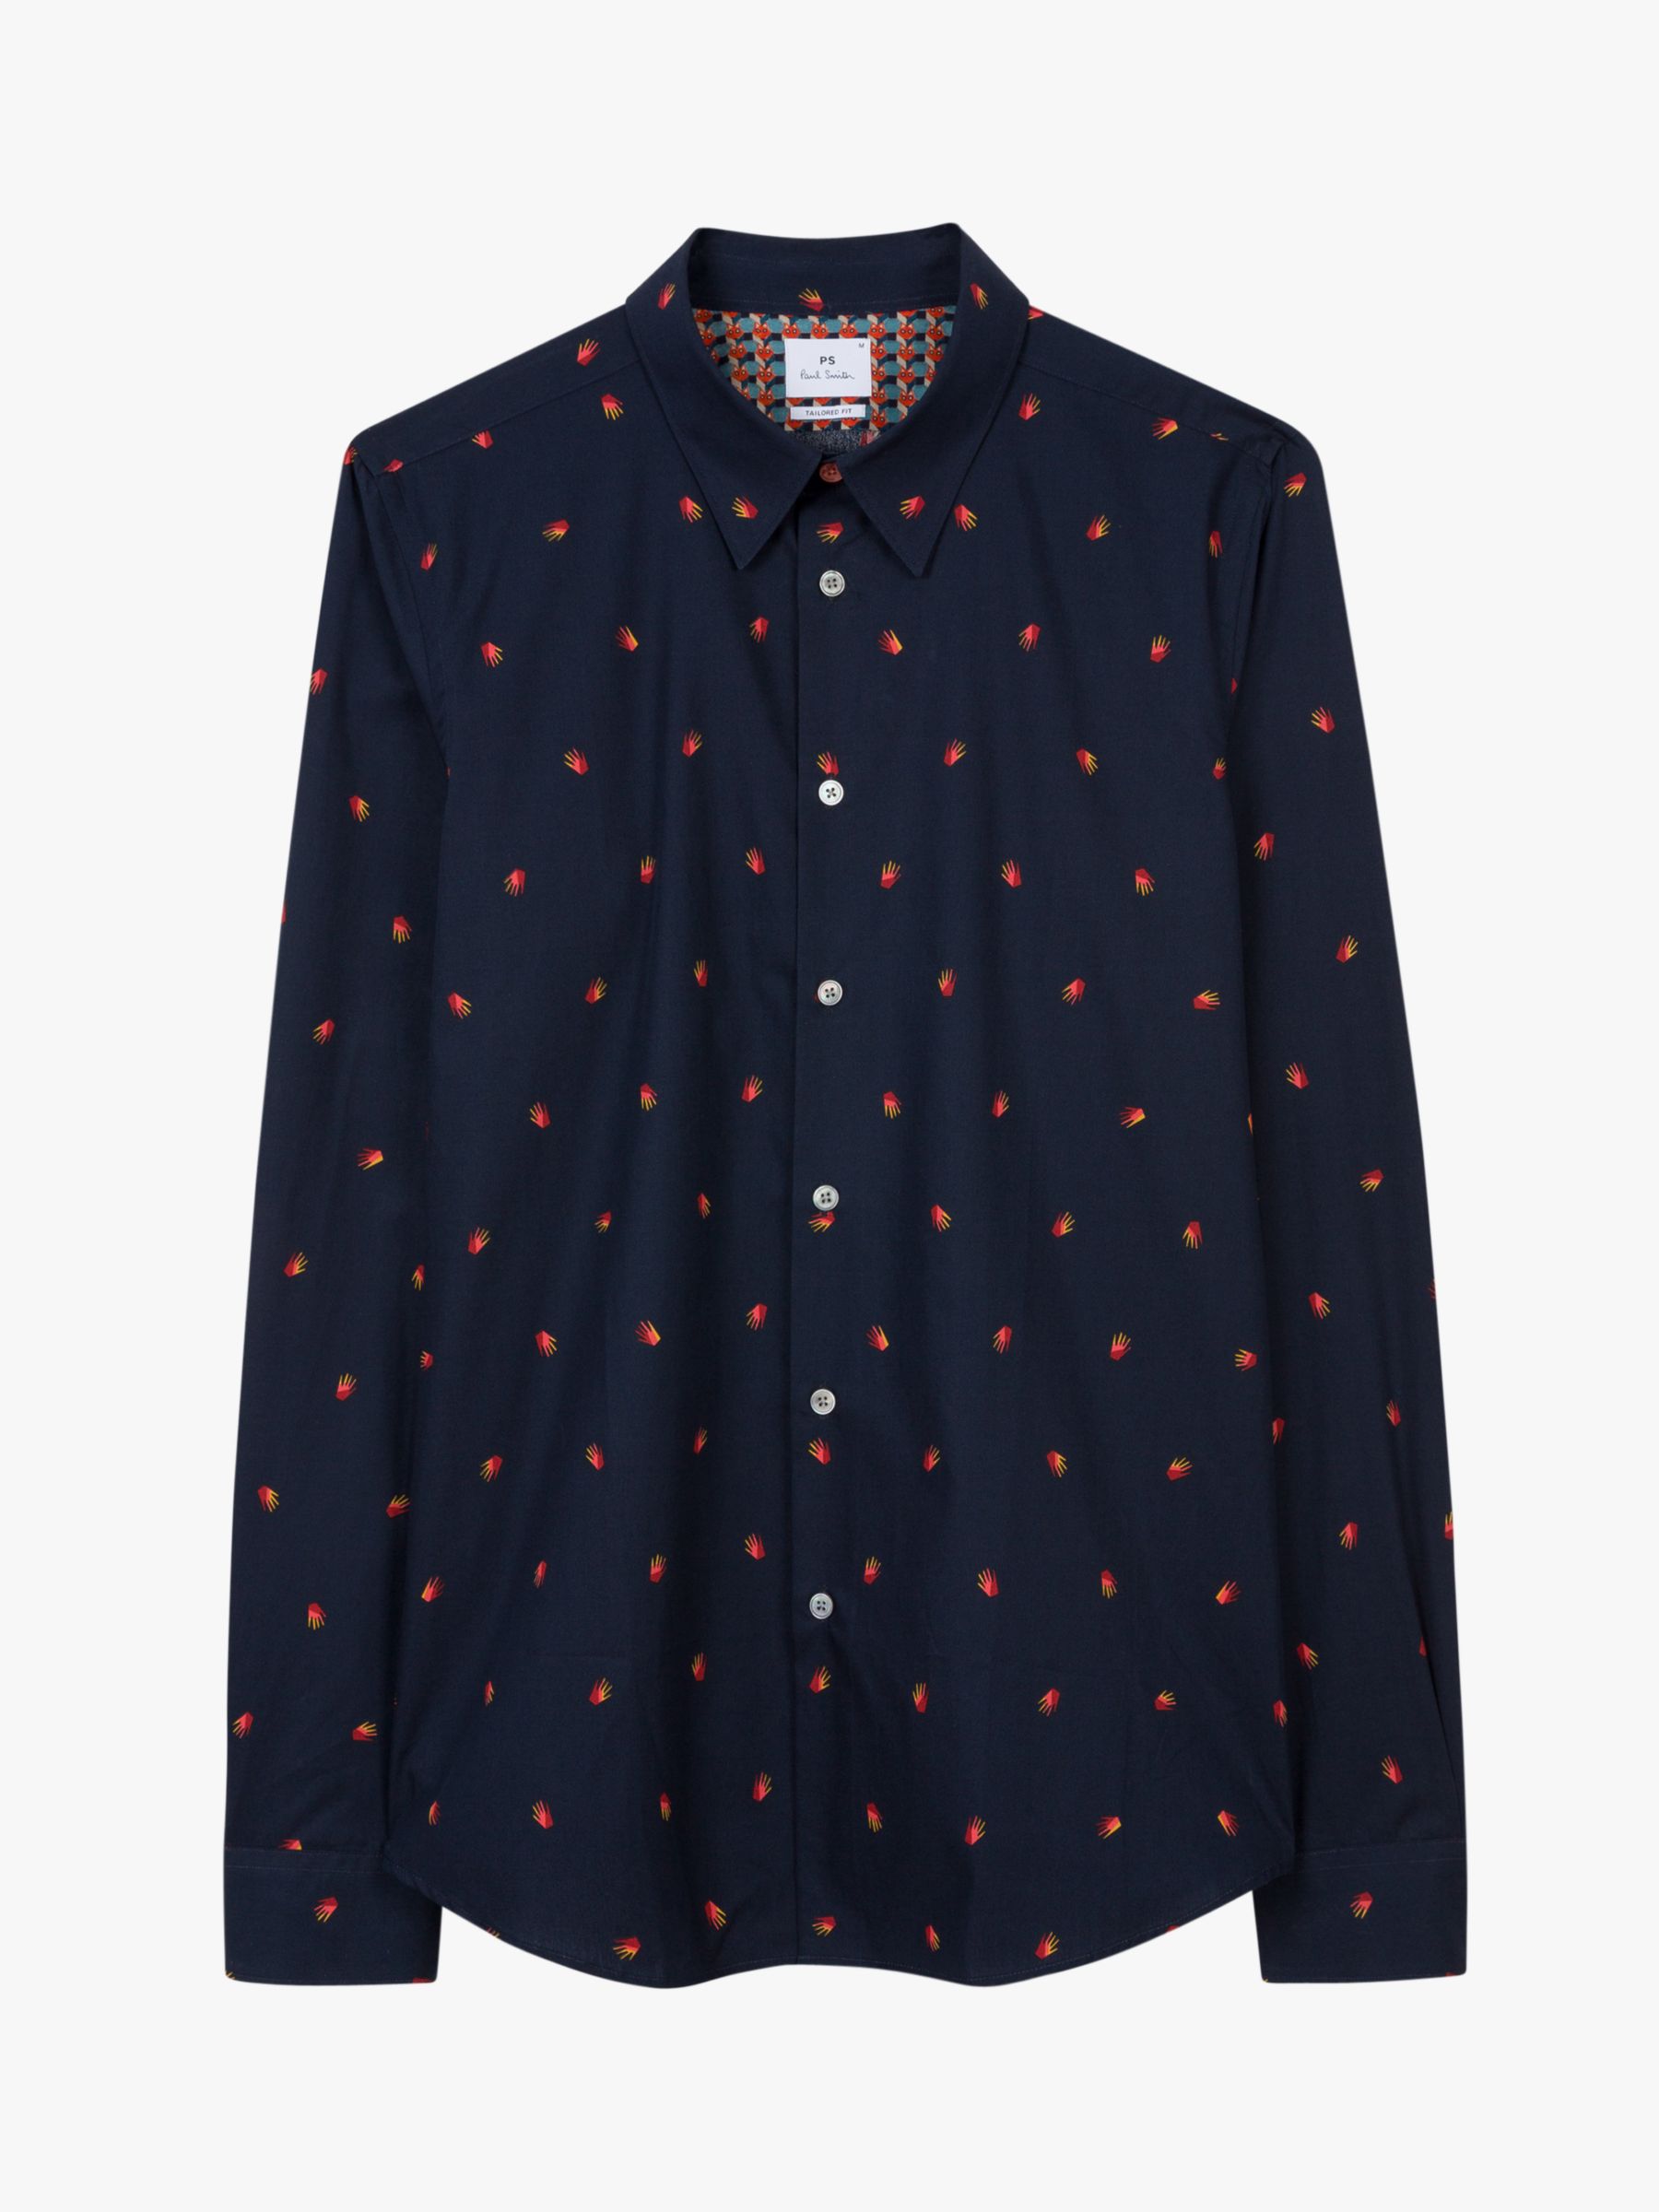 PS Paul Smith Hand Print Tailored Fit Shirt, Navy at John Lewis & Partners